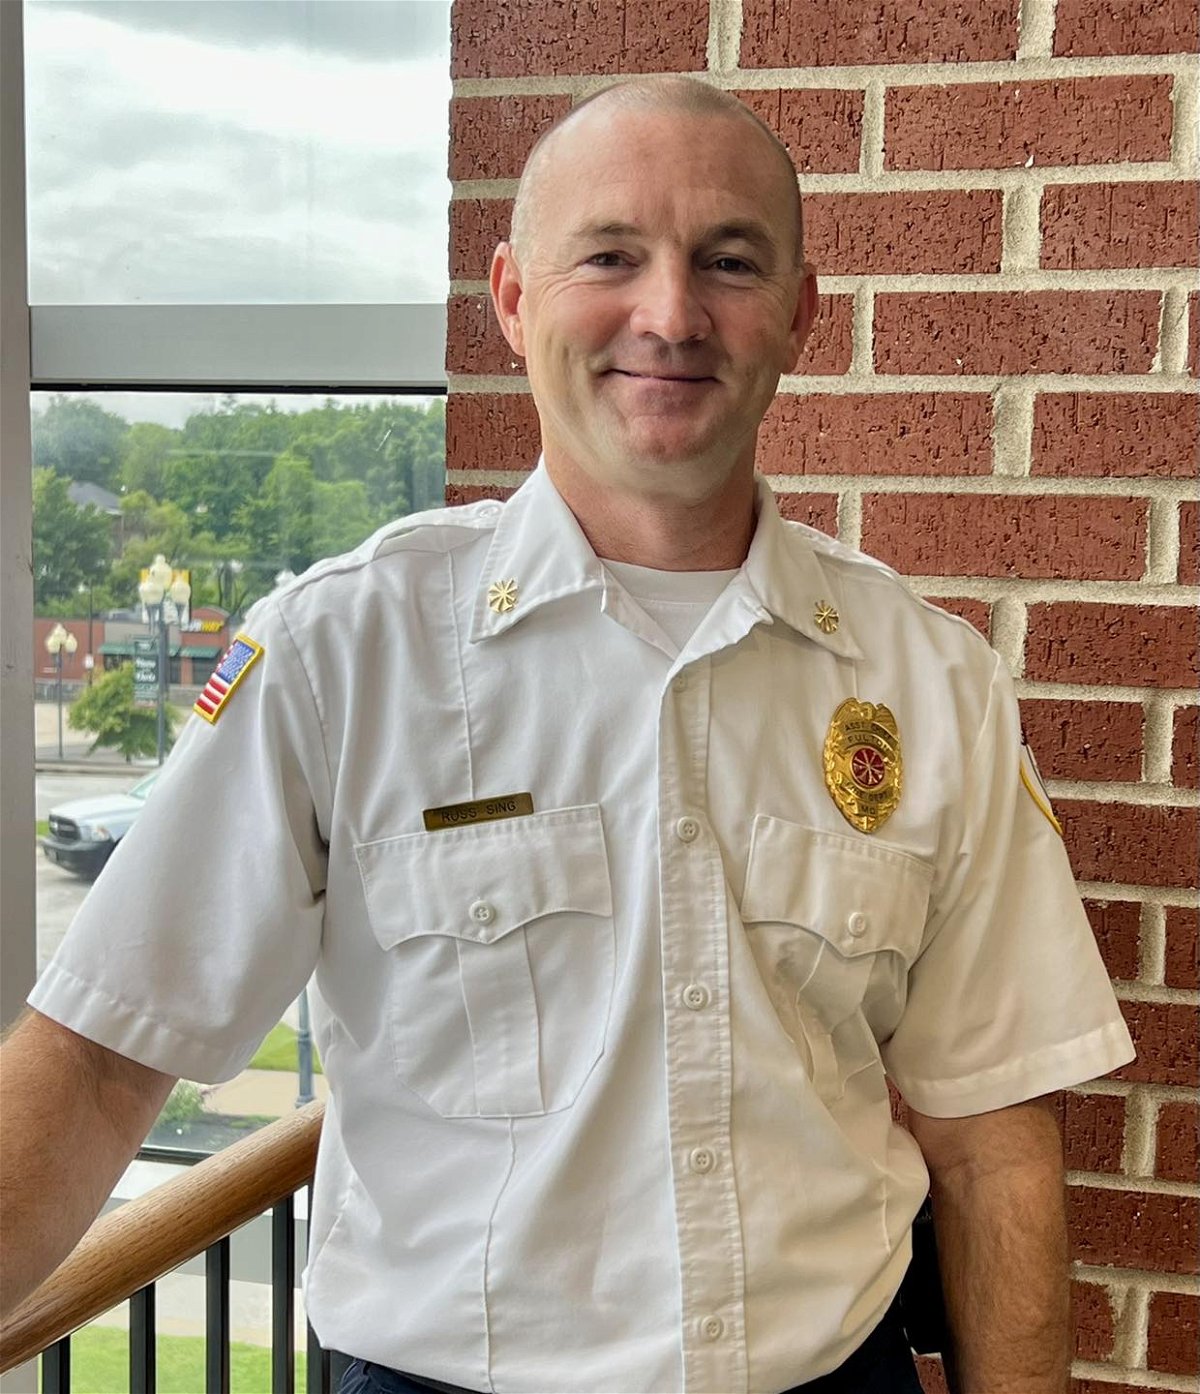 Russell Sing was named Fulton's next fire chief after Kevin Coffelt retired last week.